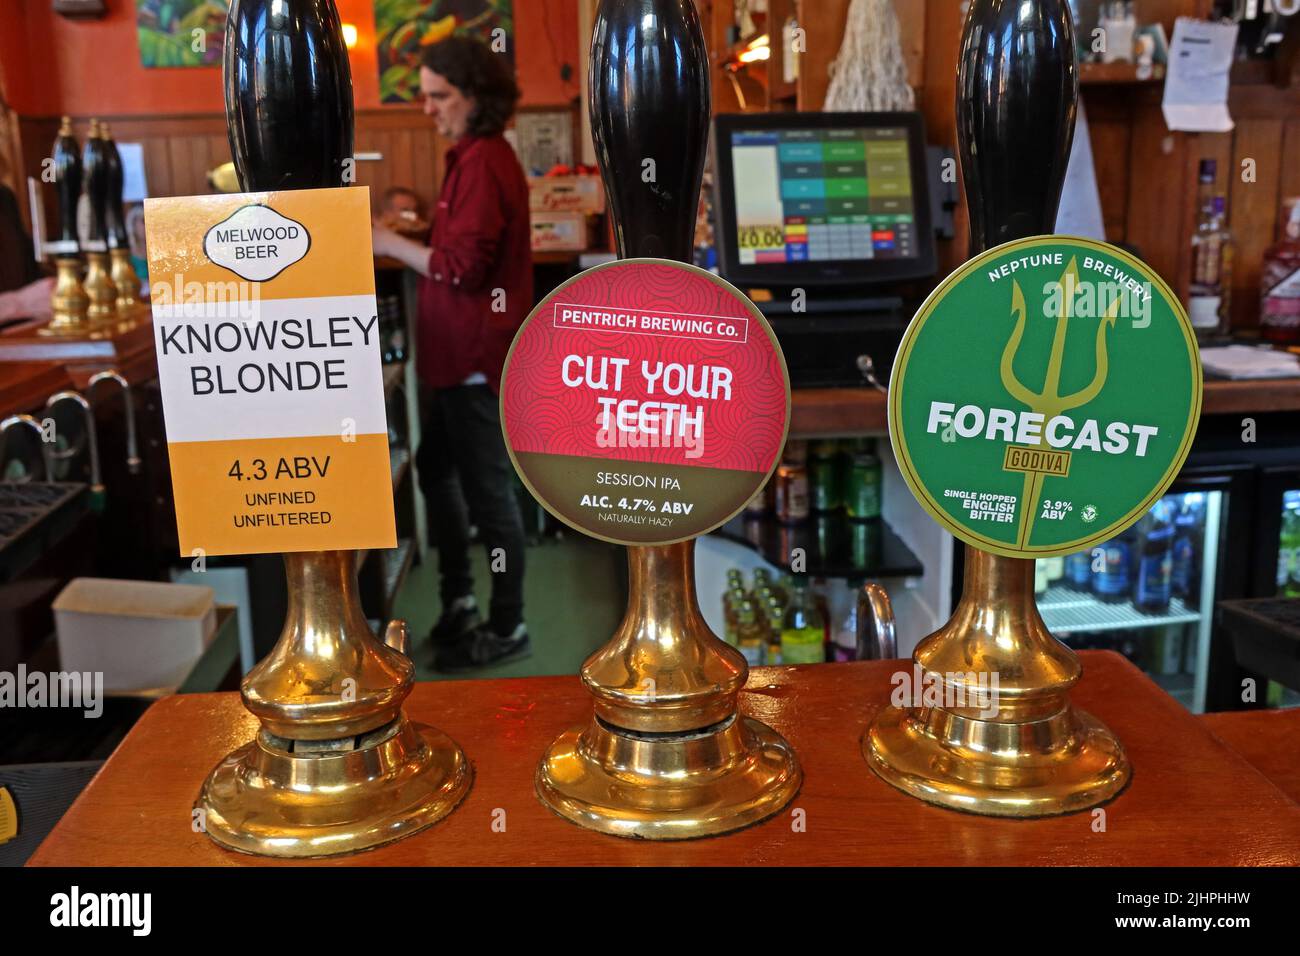 Cut Your Teeth,Pentrich Brewing Co,Session IPA,Neptune Brewery,Forecast,Godiva, draught ales,on bar at The Grapes,Liverpool Stock Photo